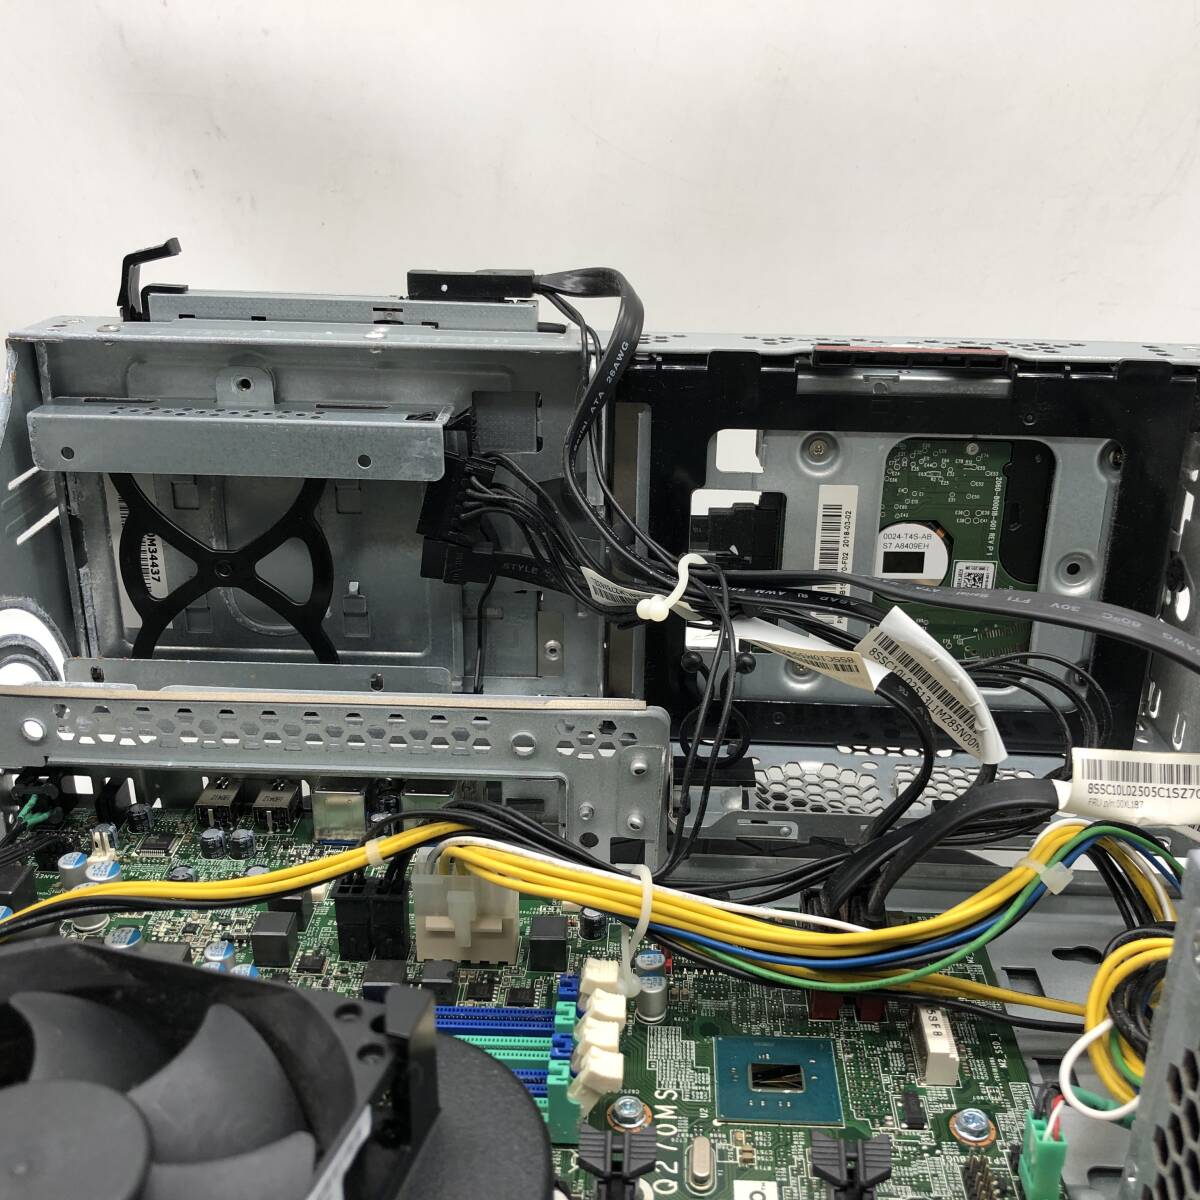 [ liquidation special price ] Junk 2018 year NEC Mate PC-MKM34EZG1 CPU Core i5-7500 memory less HDD500GB OS none DVD used desk top personal computer PC base 